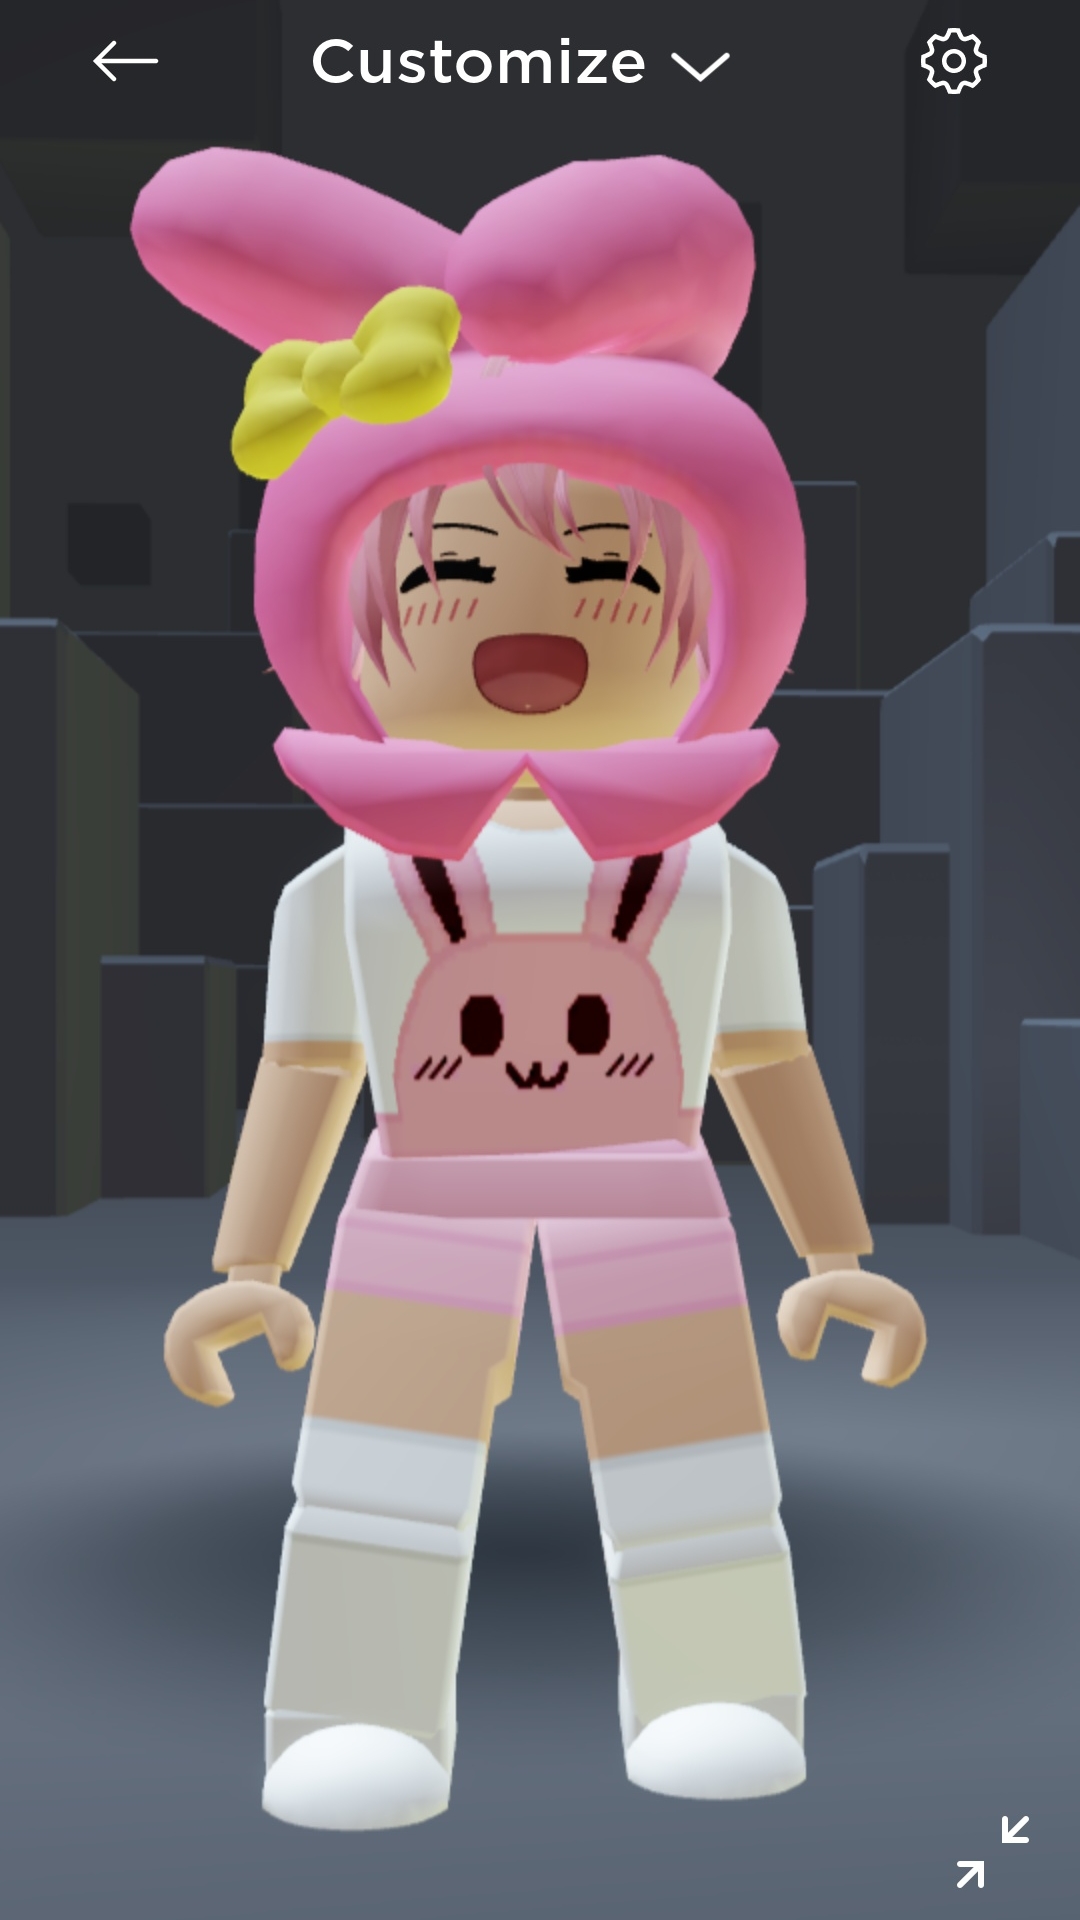 My roblox avatar girl version with a white shirt